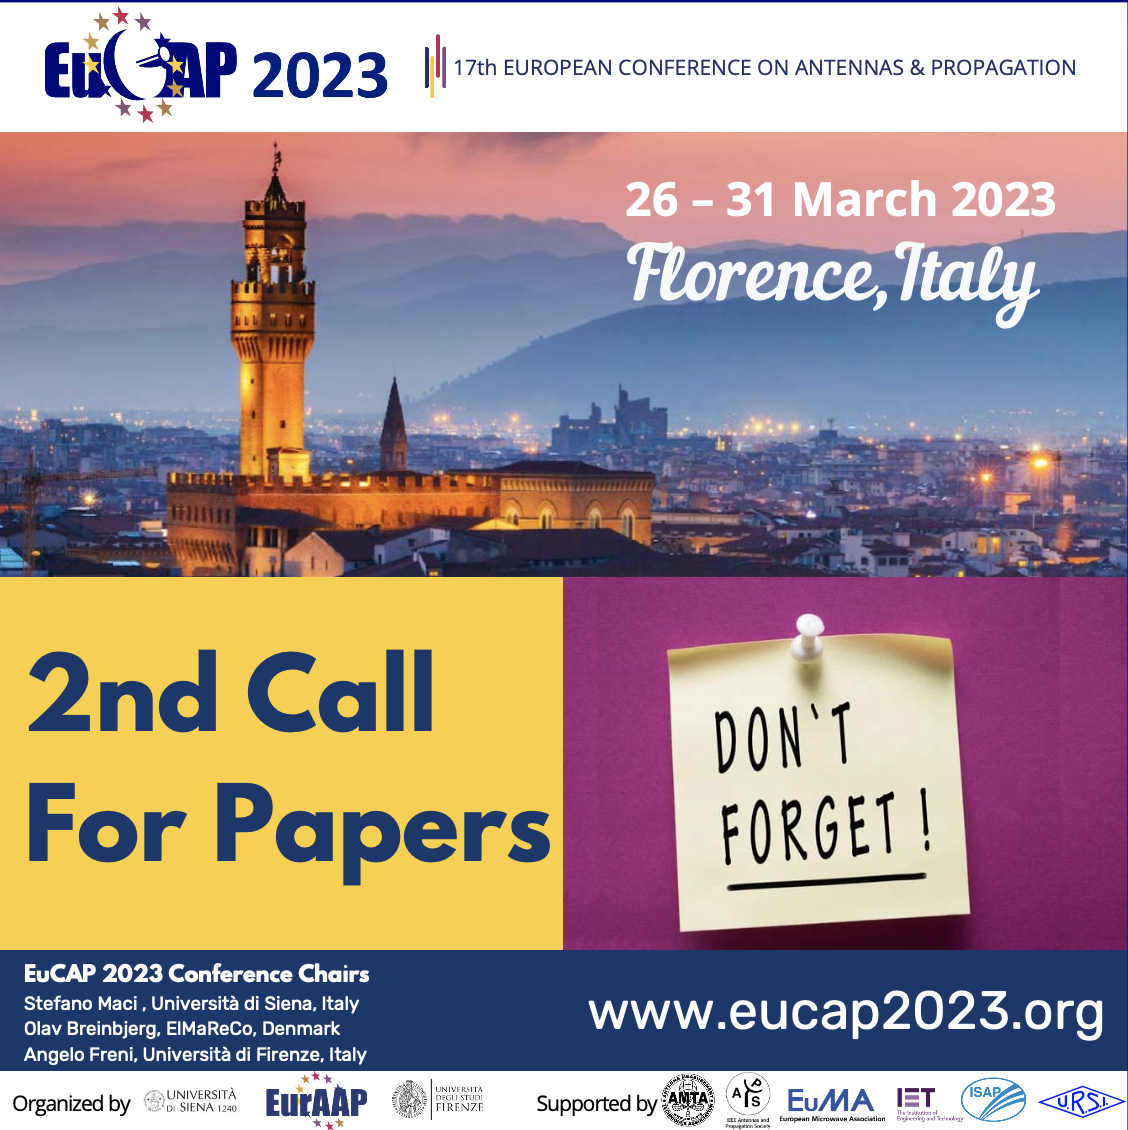 eucap2023-second-call-for-papers-eurapp